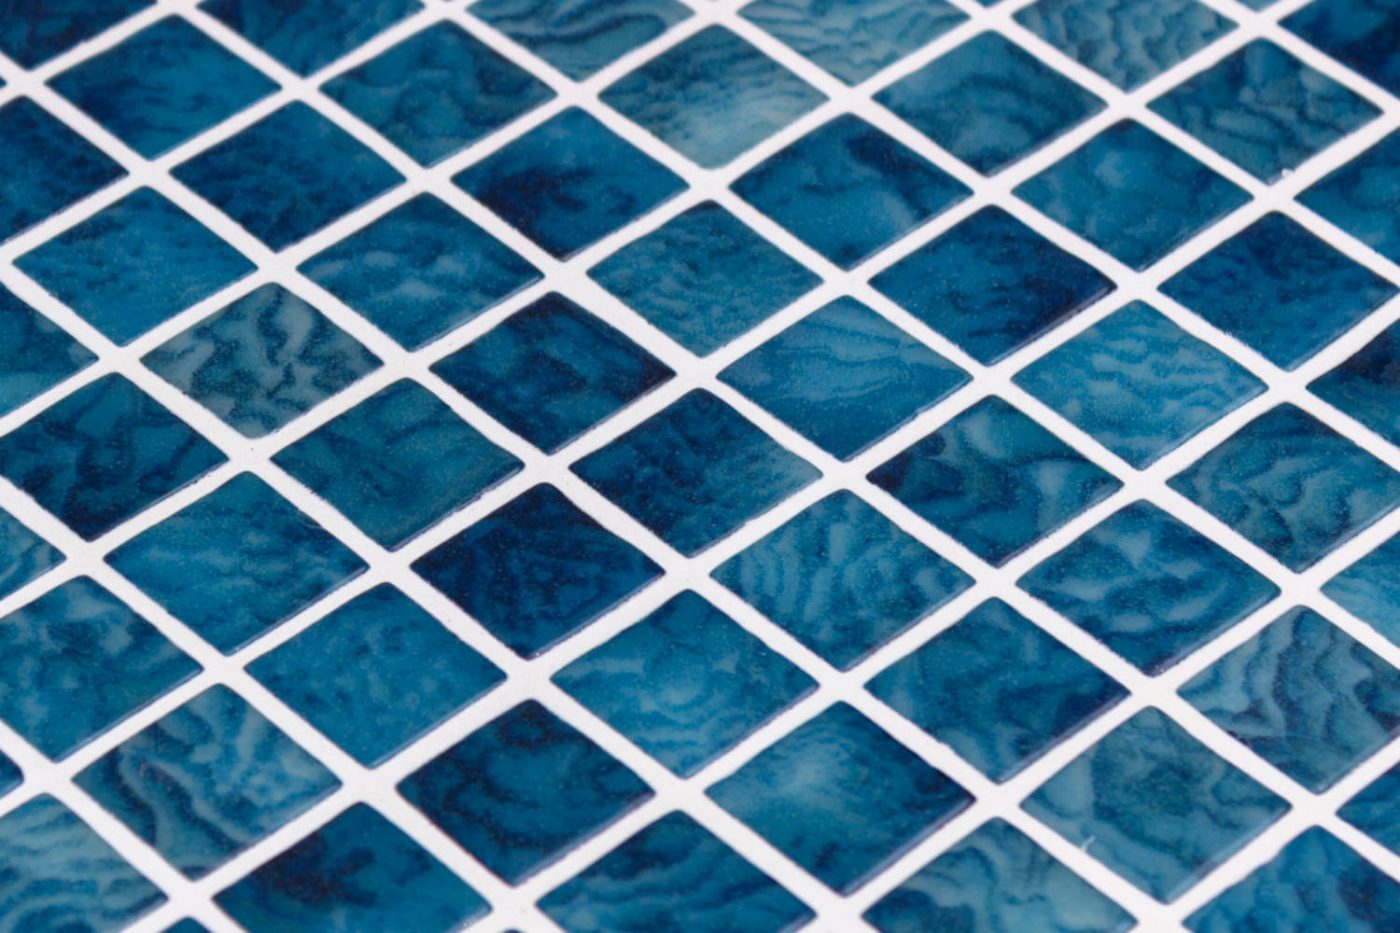 ARRECIFE-BLUE_RMS-TRADERS_NATURAL-STONE-POOL-MOSAIC-SUPPLIER-MELBOURNE-1-scaled